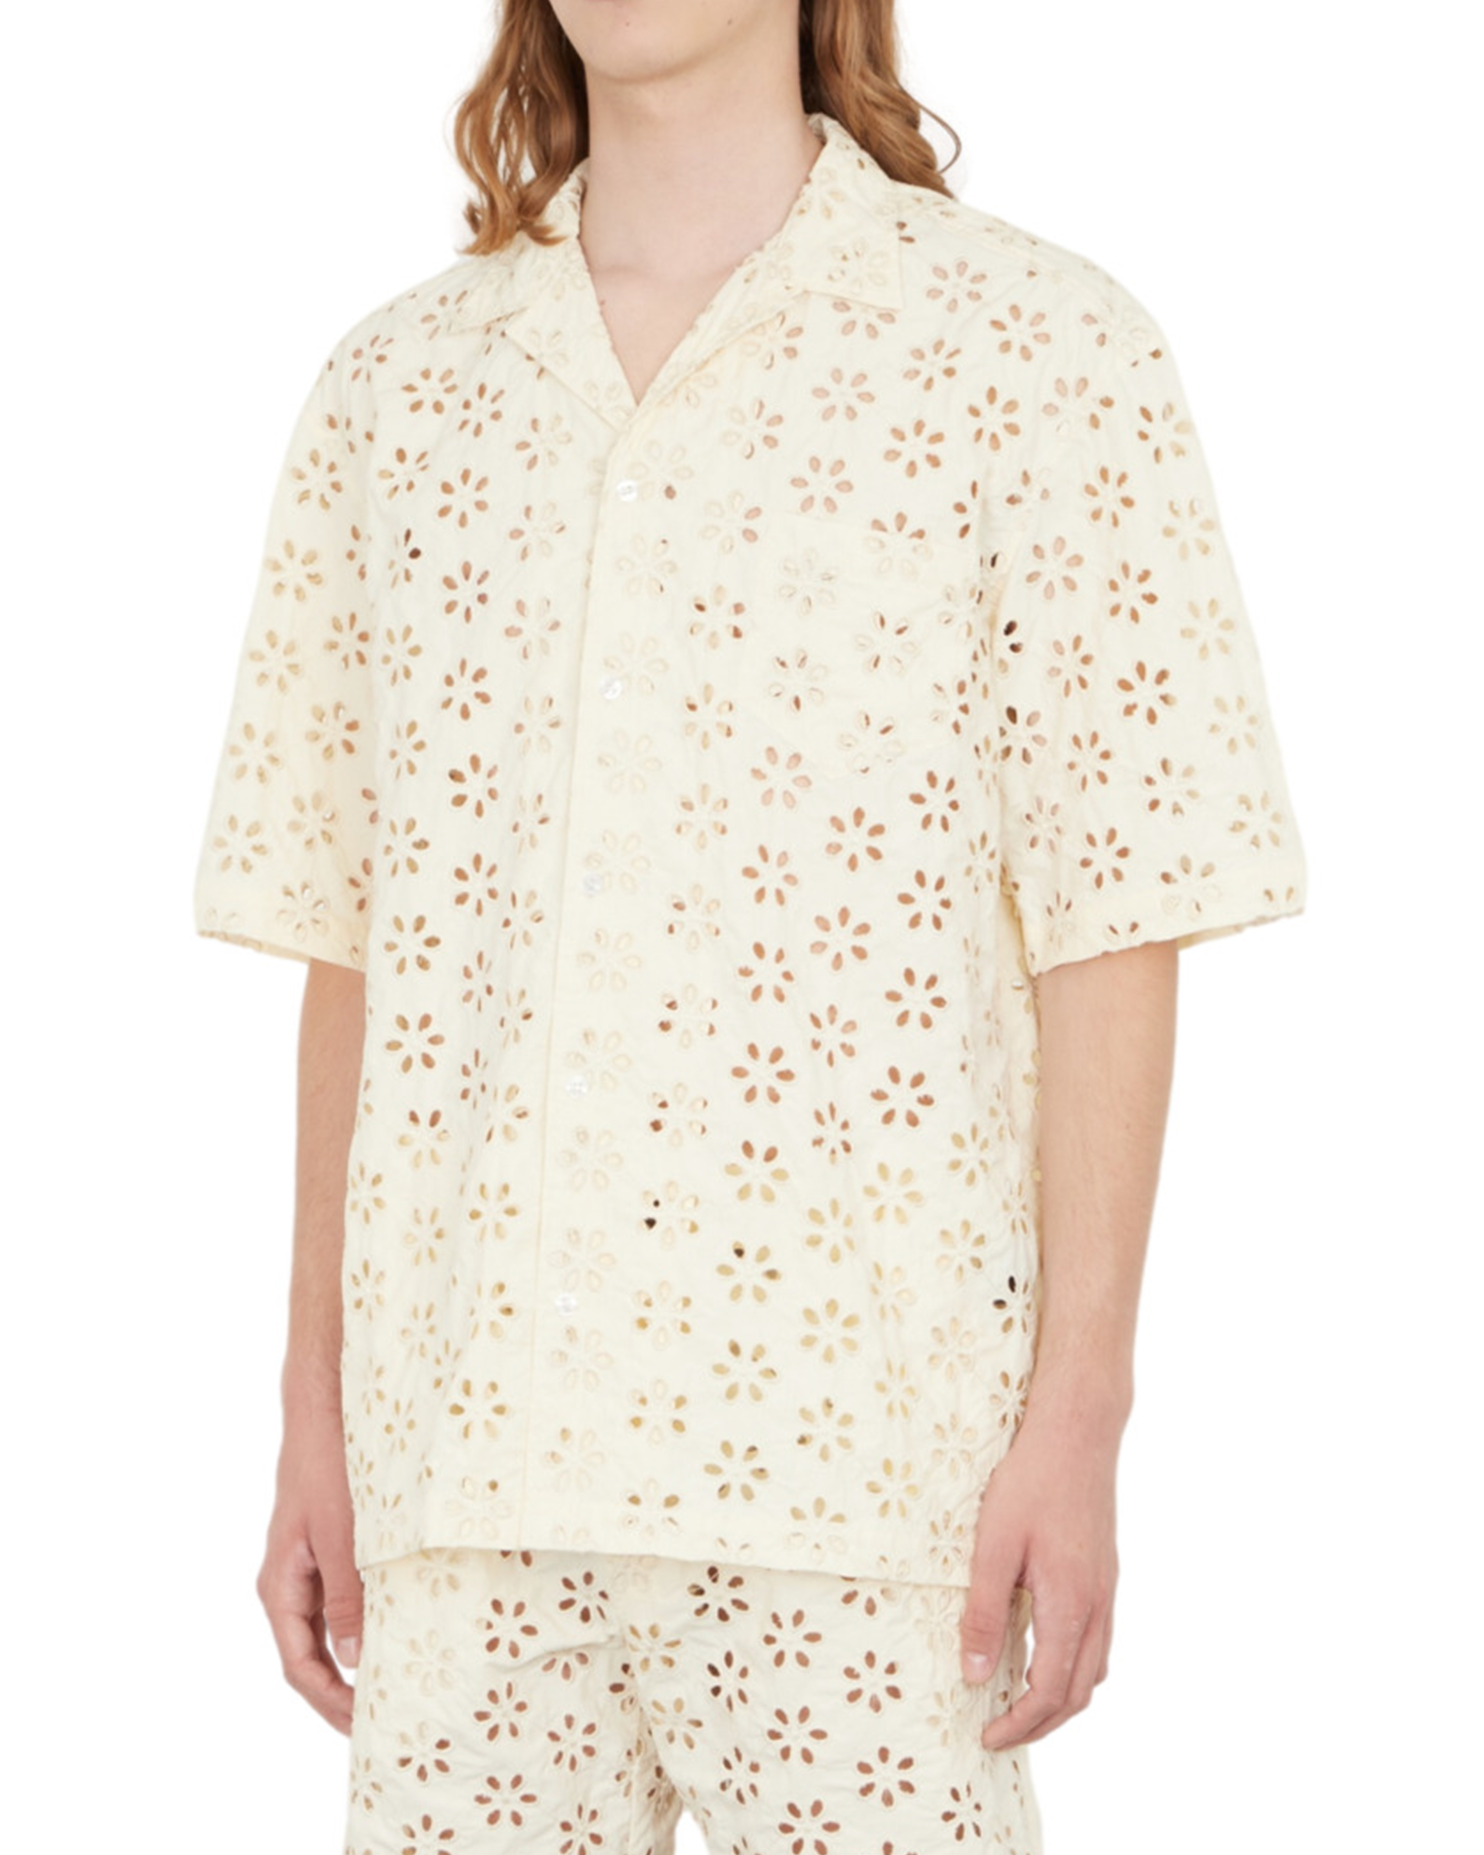 FLOWER EMBROIDERY SHIRT